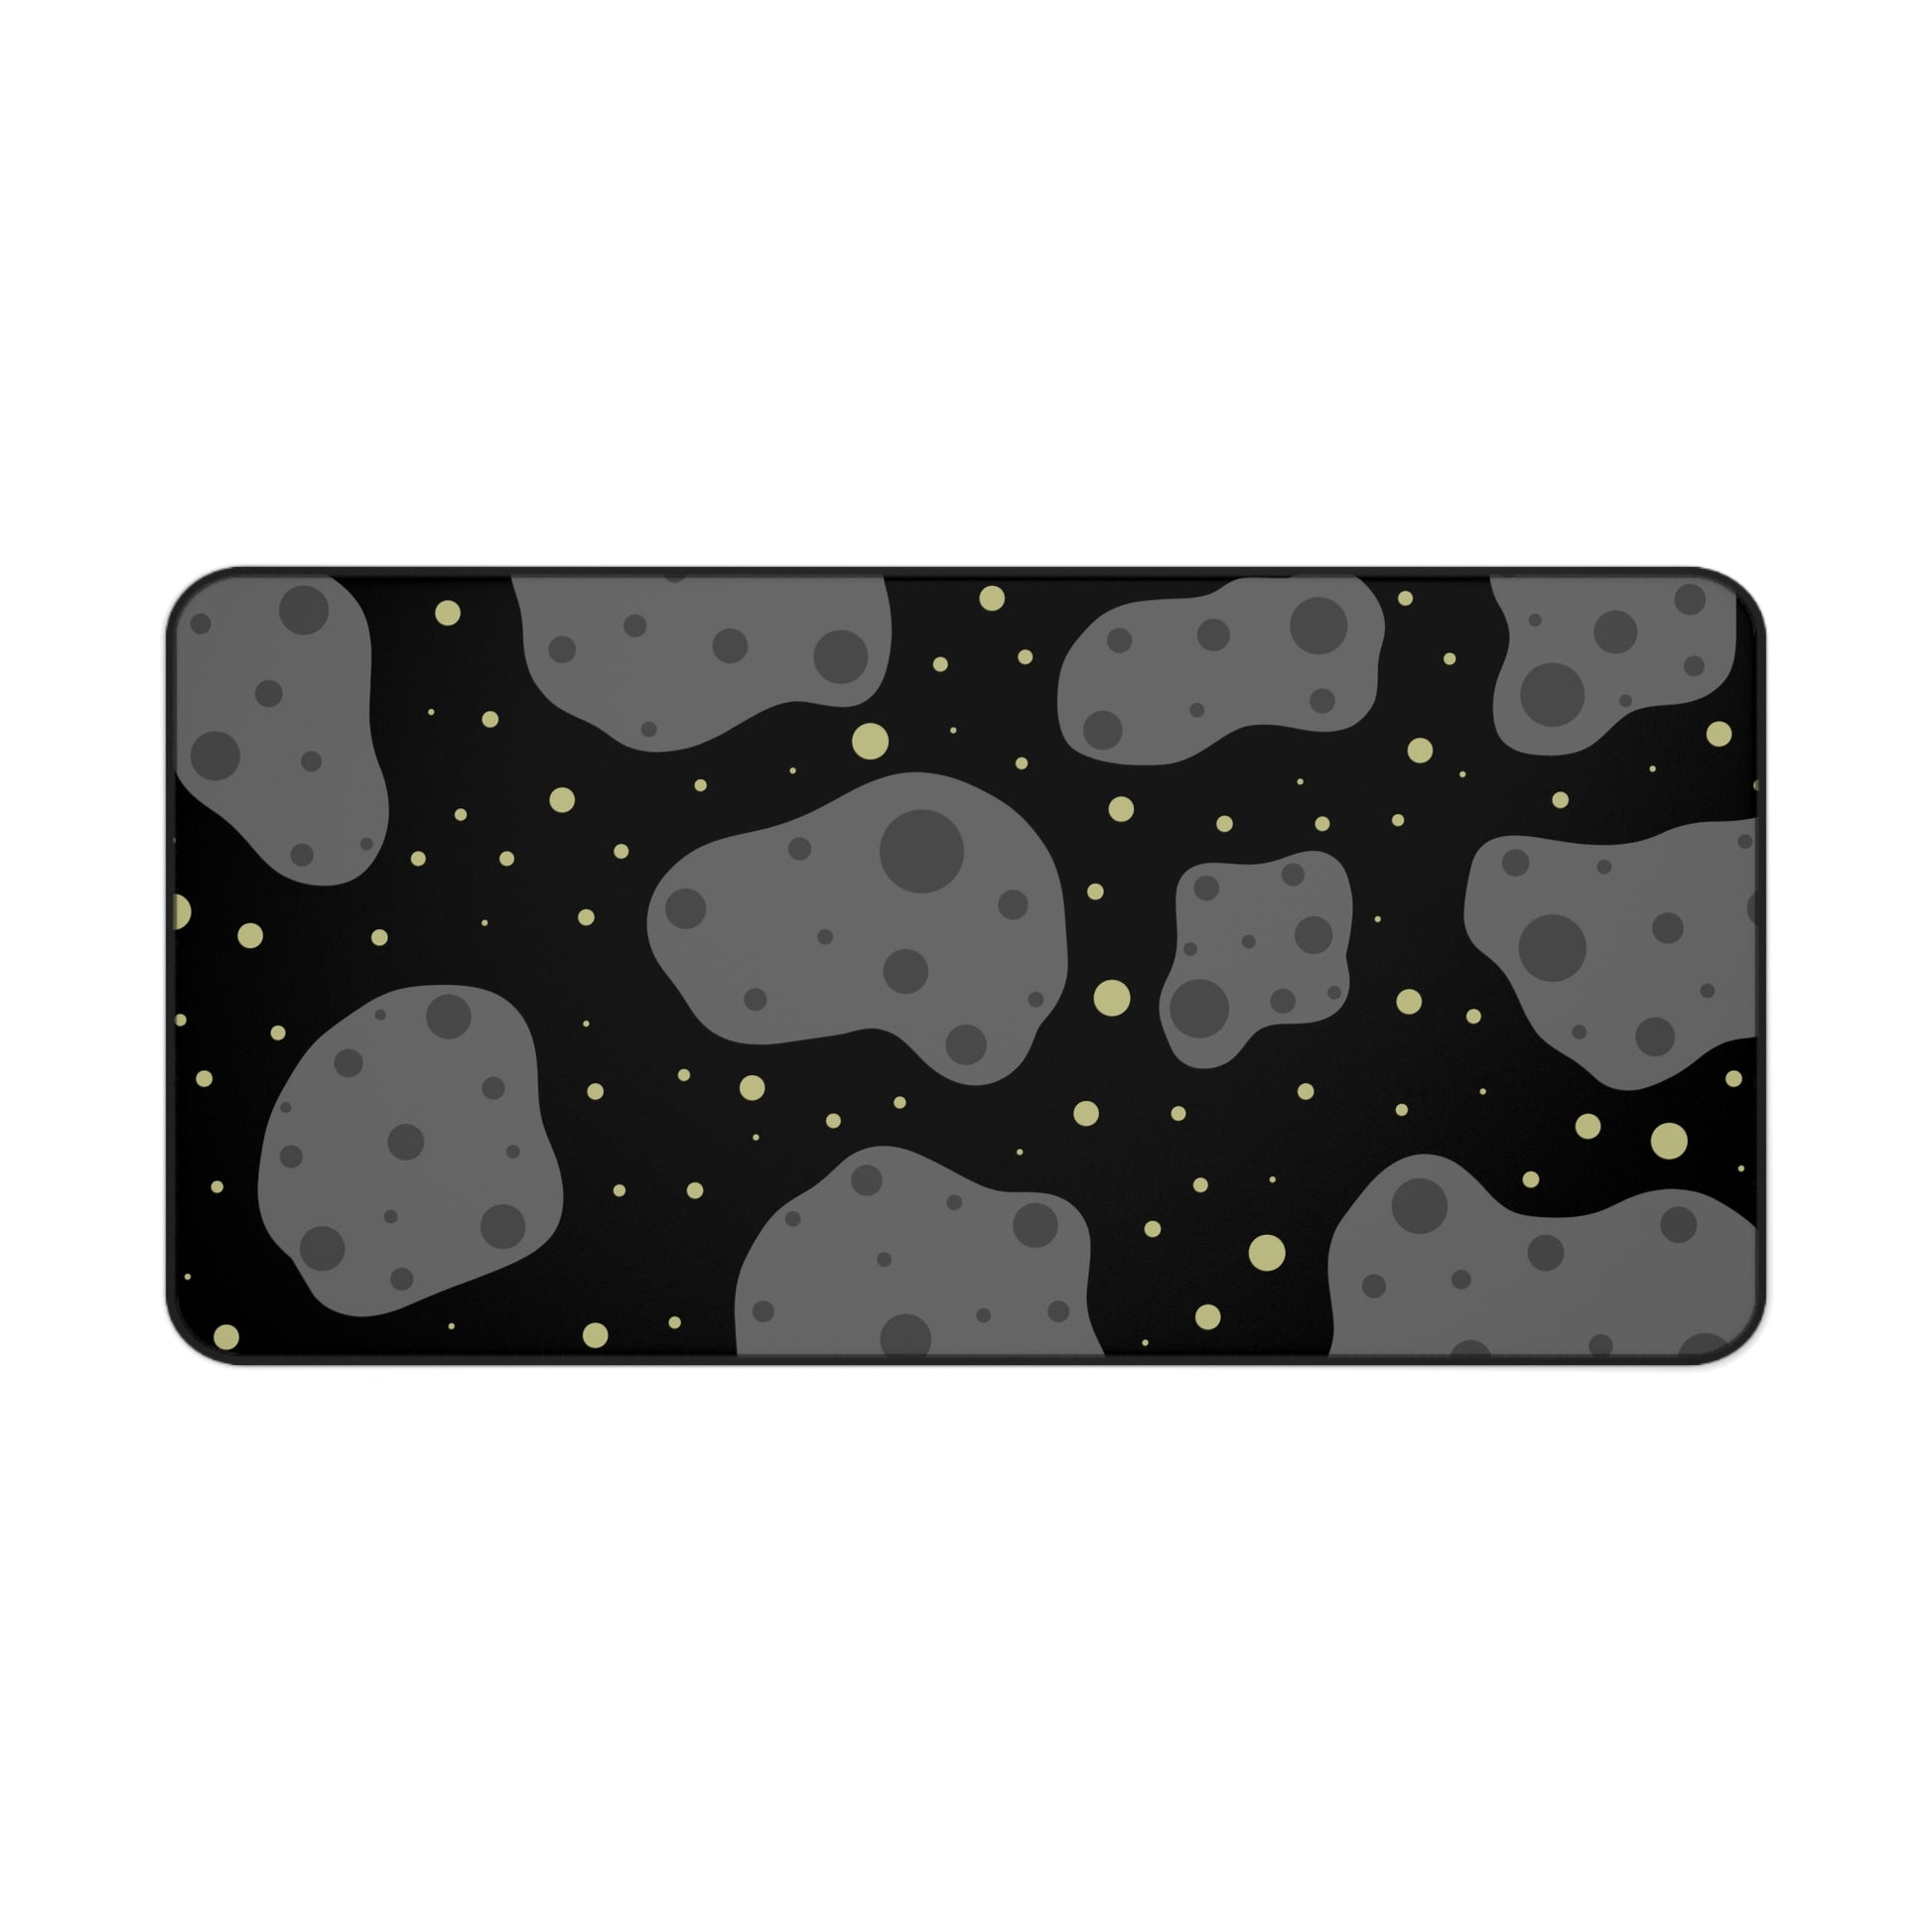 A 31" x 15.5" desk mat with a black background, gray asteroids, and yellow stars.